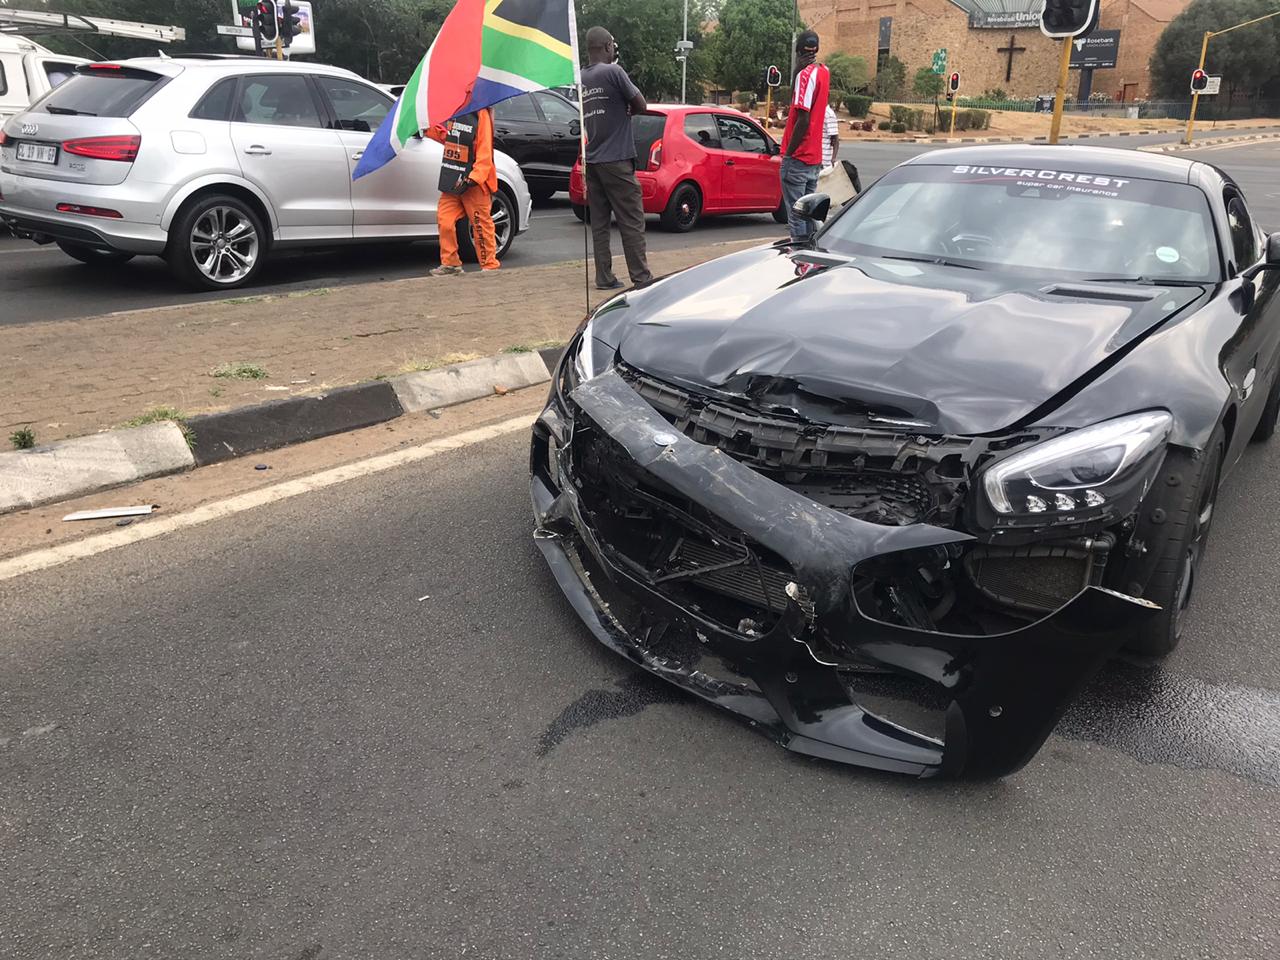 One injured in collision at intersection in Sandton